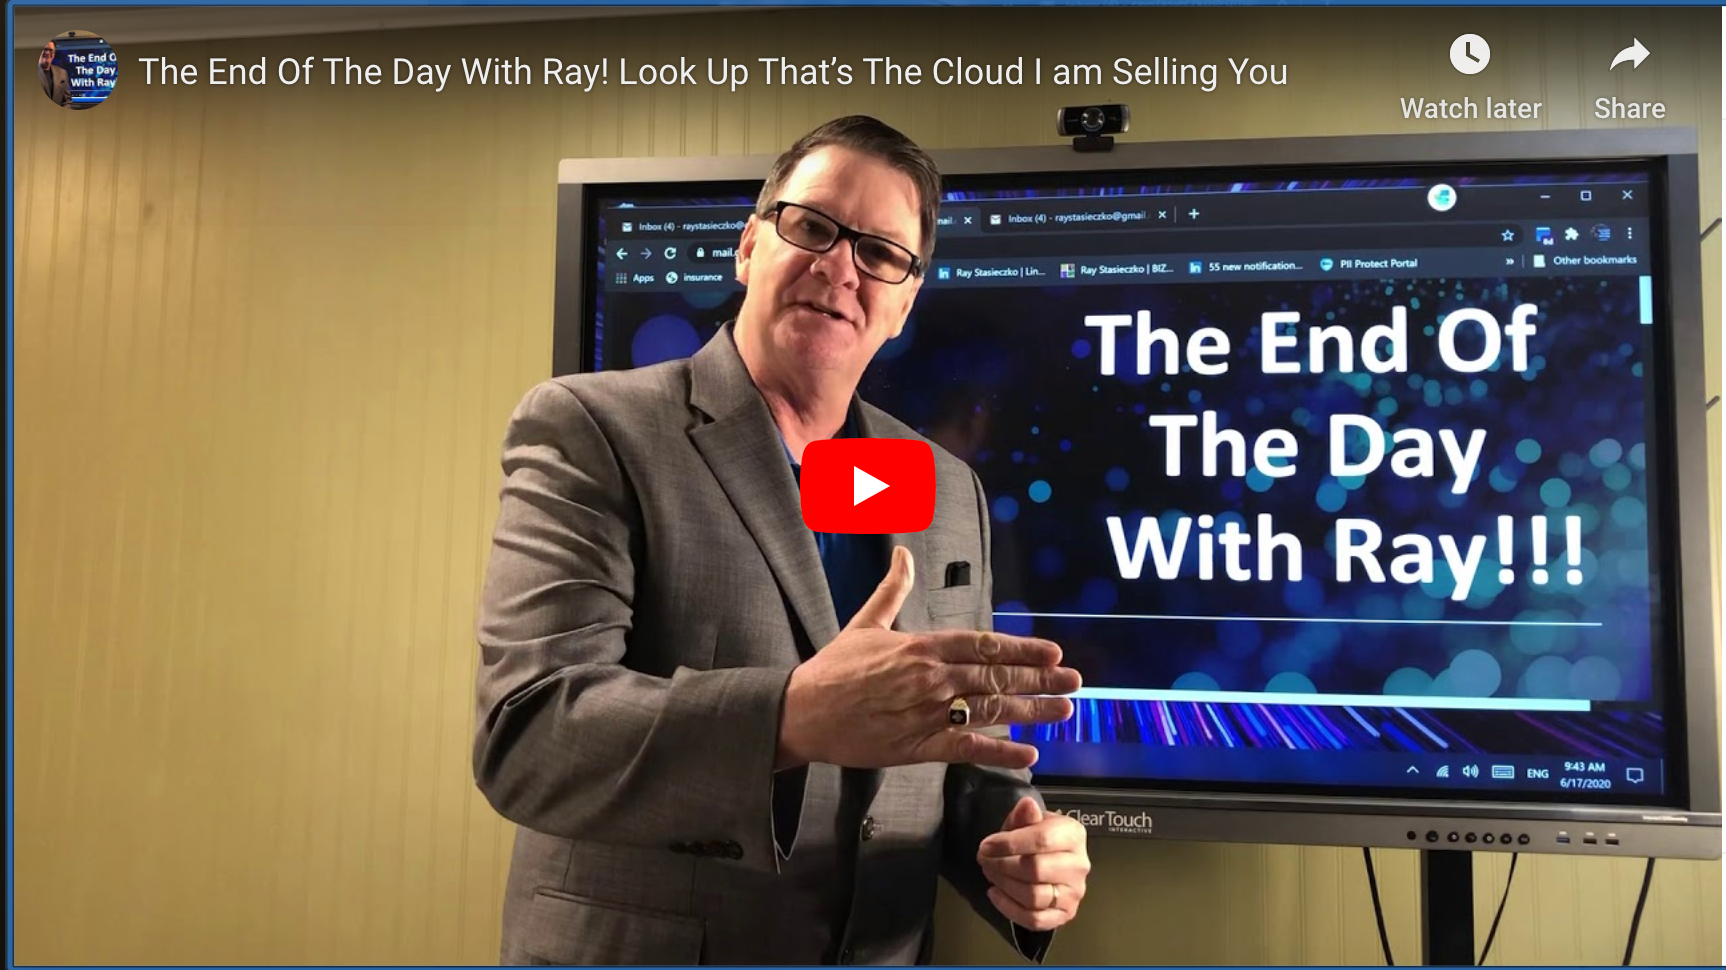 The End Of The Day With Ray! Look Up That’s The Cloud I am Selling You